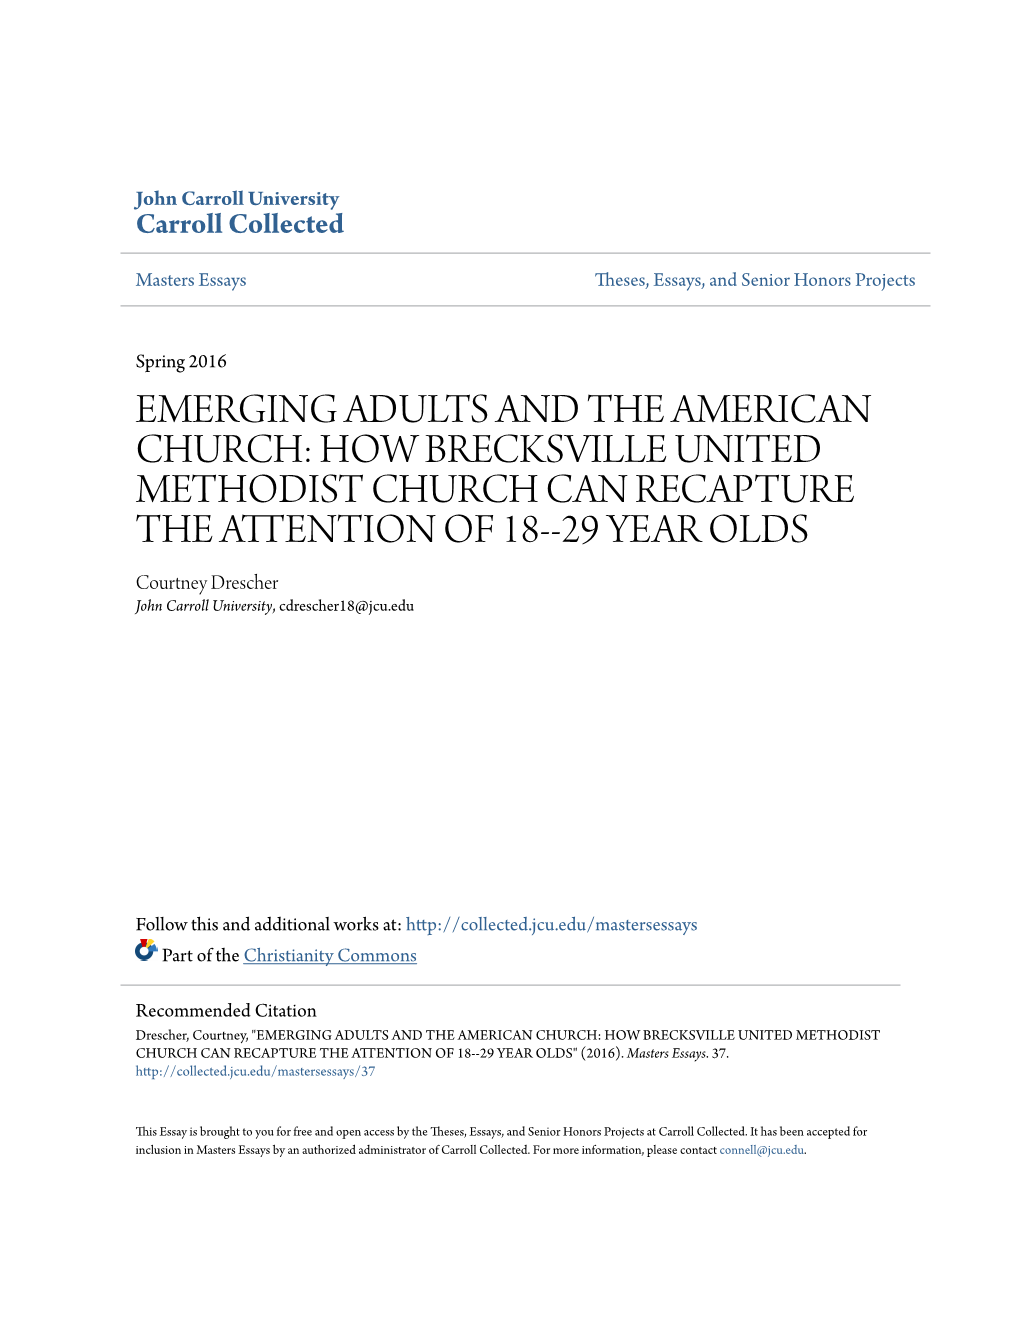 Emerging Adults and the American Church: How Brecksville United